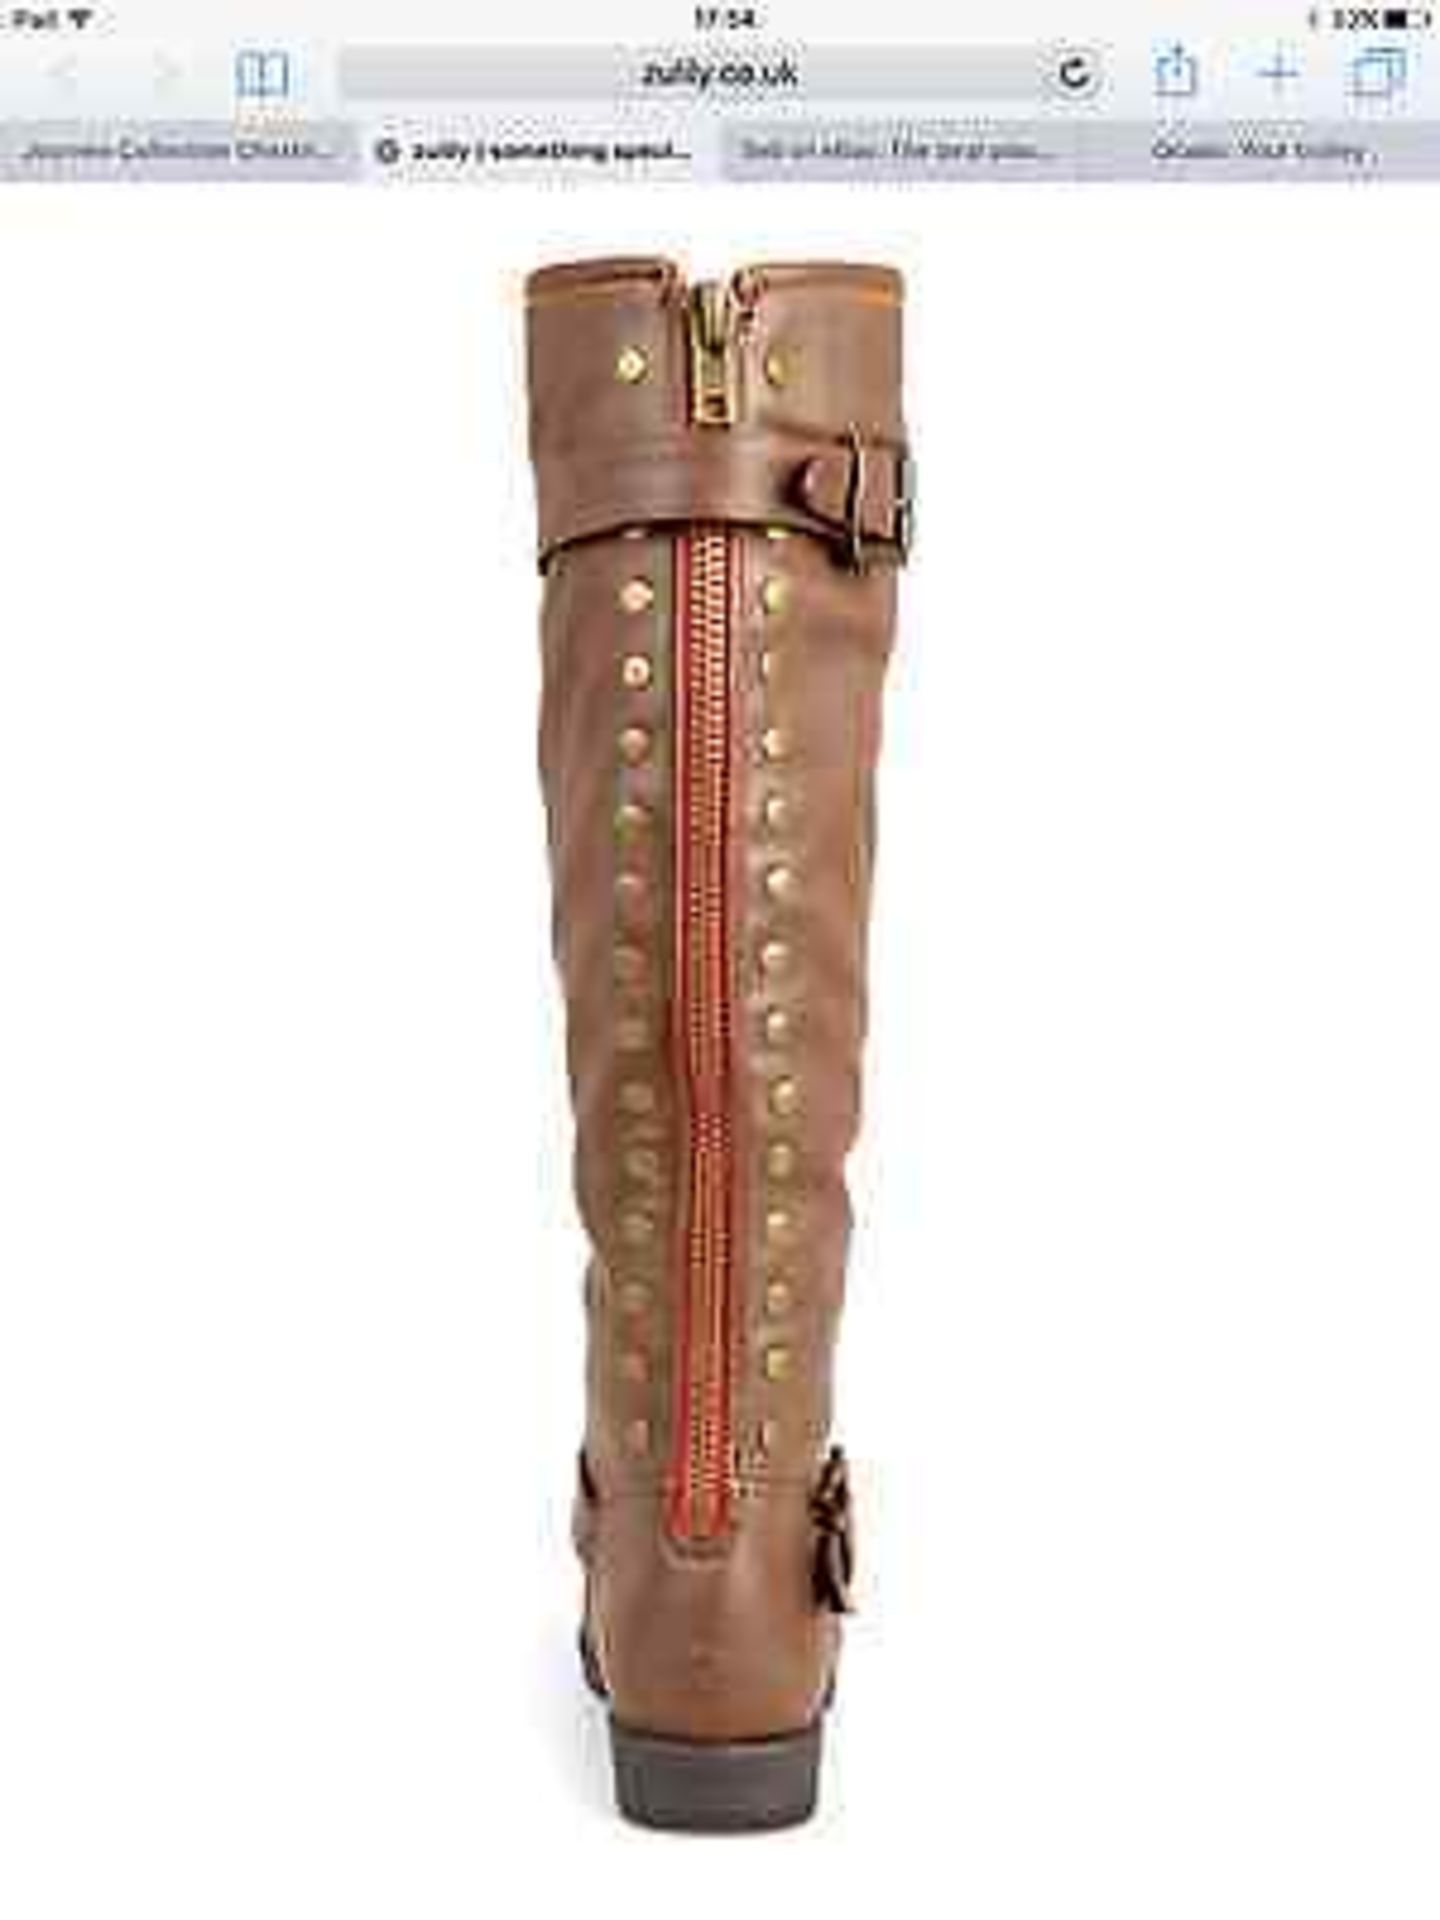 Journee Collection Chestnut Spokane Extra-Wide Calf Boot, Size Eur 39.5 (New with box) - Image 4 of 6